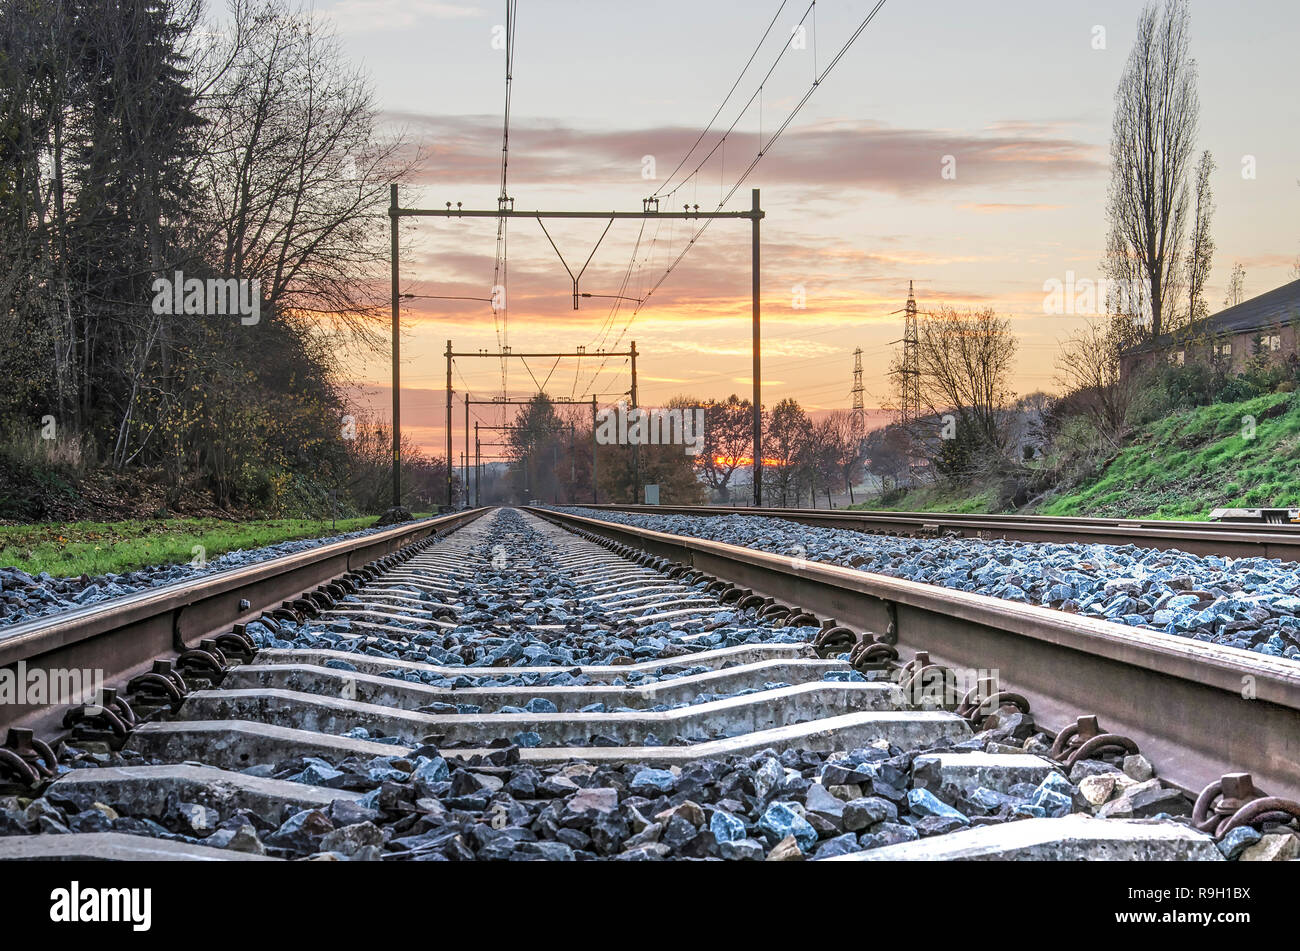 View between the two steel bars of a railroad track diminishing in the distance, in the Dutch province of Limburg, at sunset Stock Photo